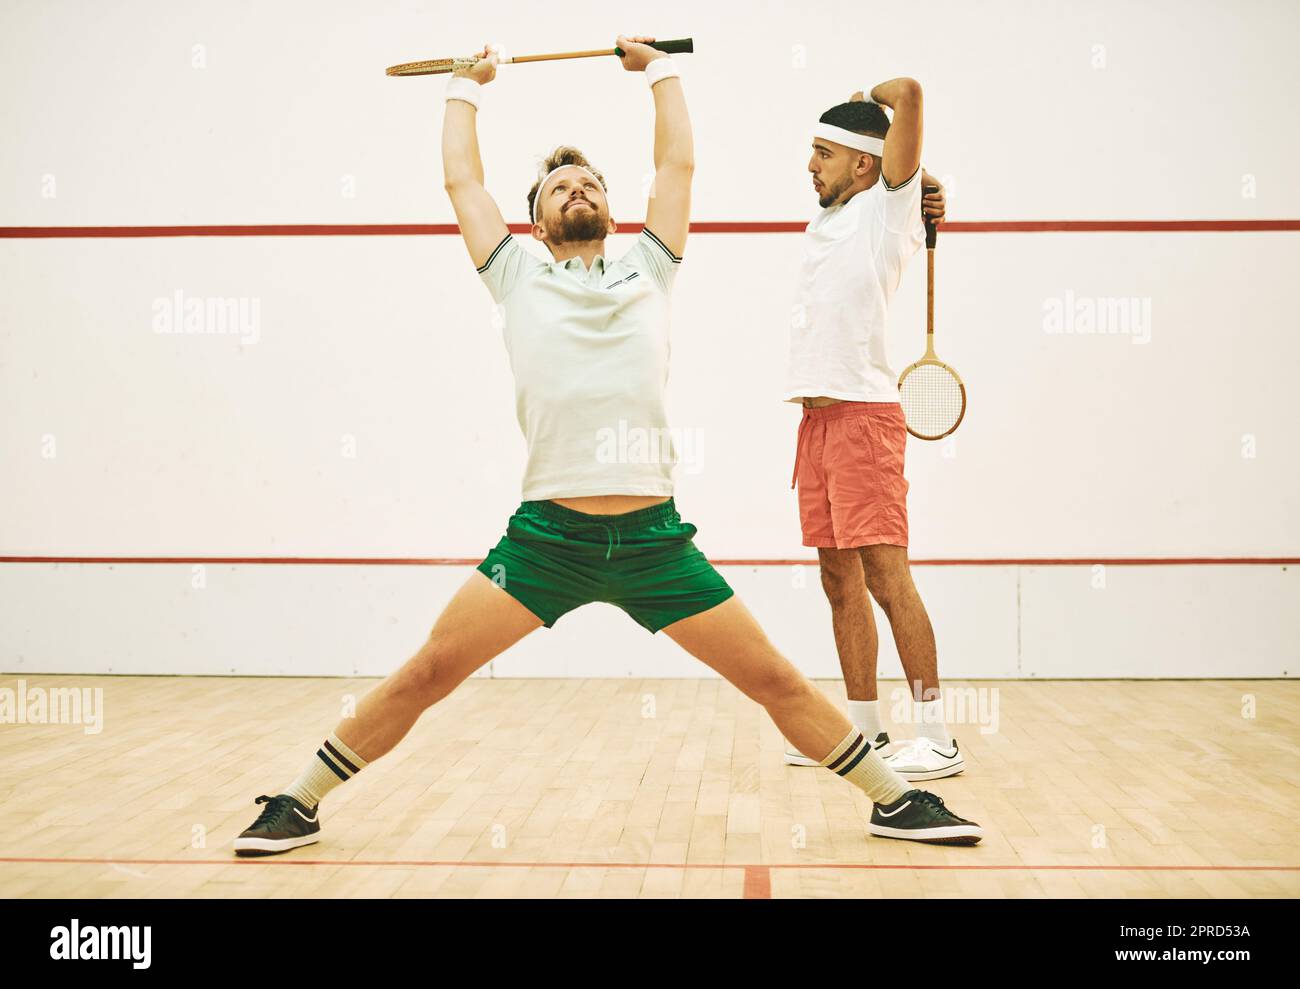 Nothing maximises your performance like a good warmup. two young men stretching before playing a game of squash. Stock Photo